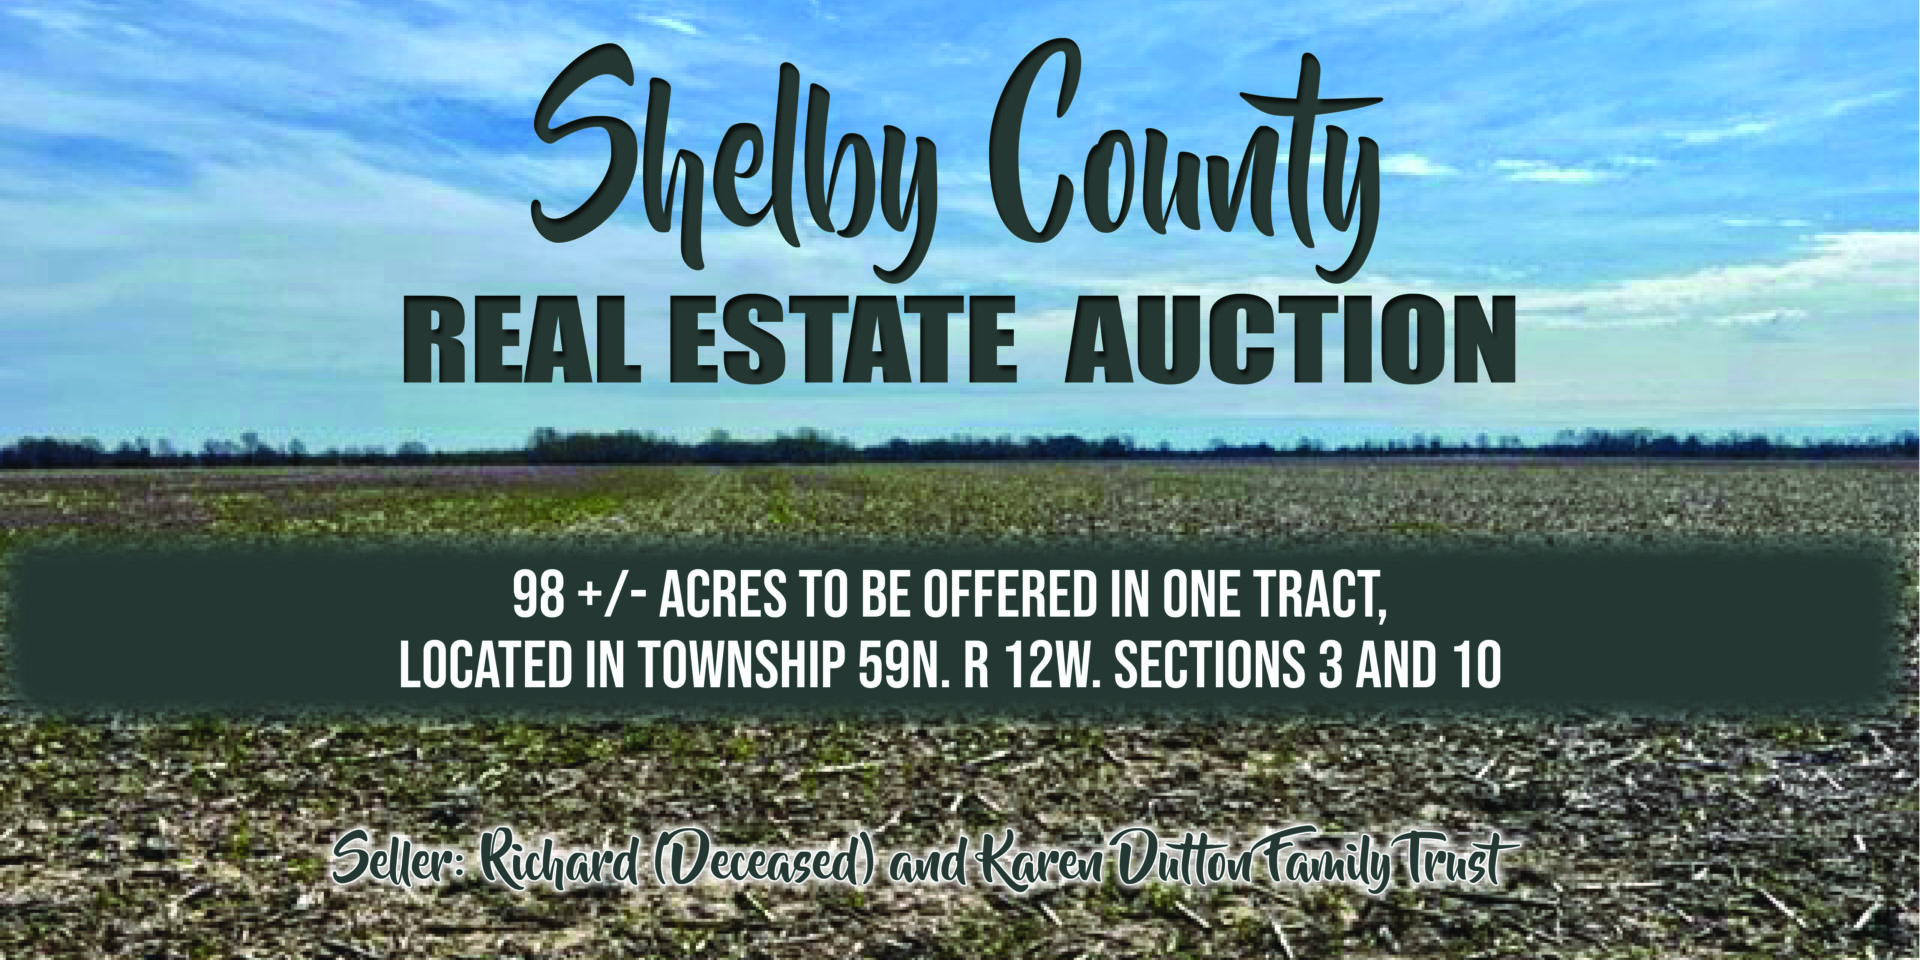 Shelby County Real Estate Auction “Cherry Box Community”